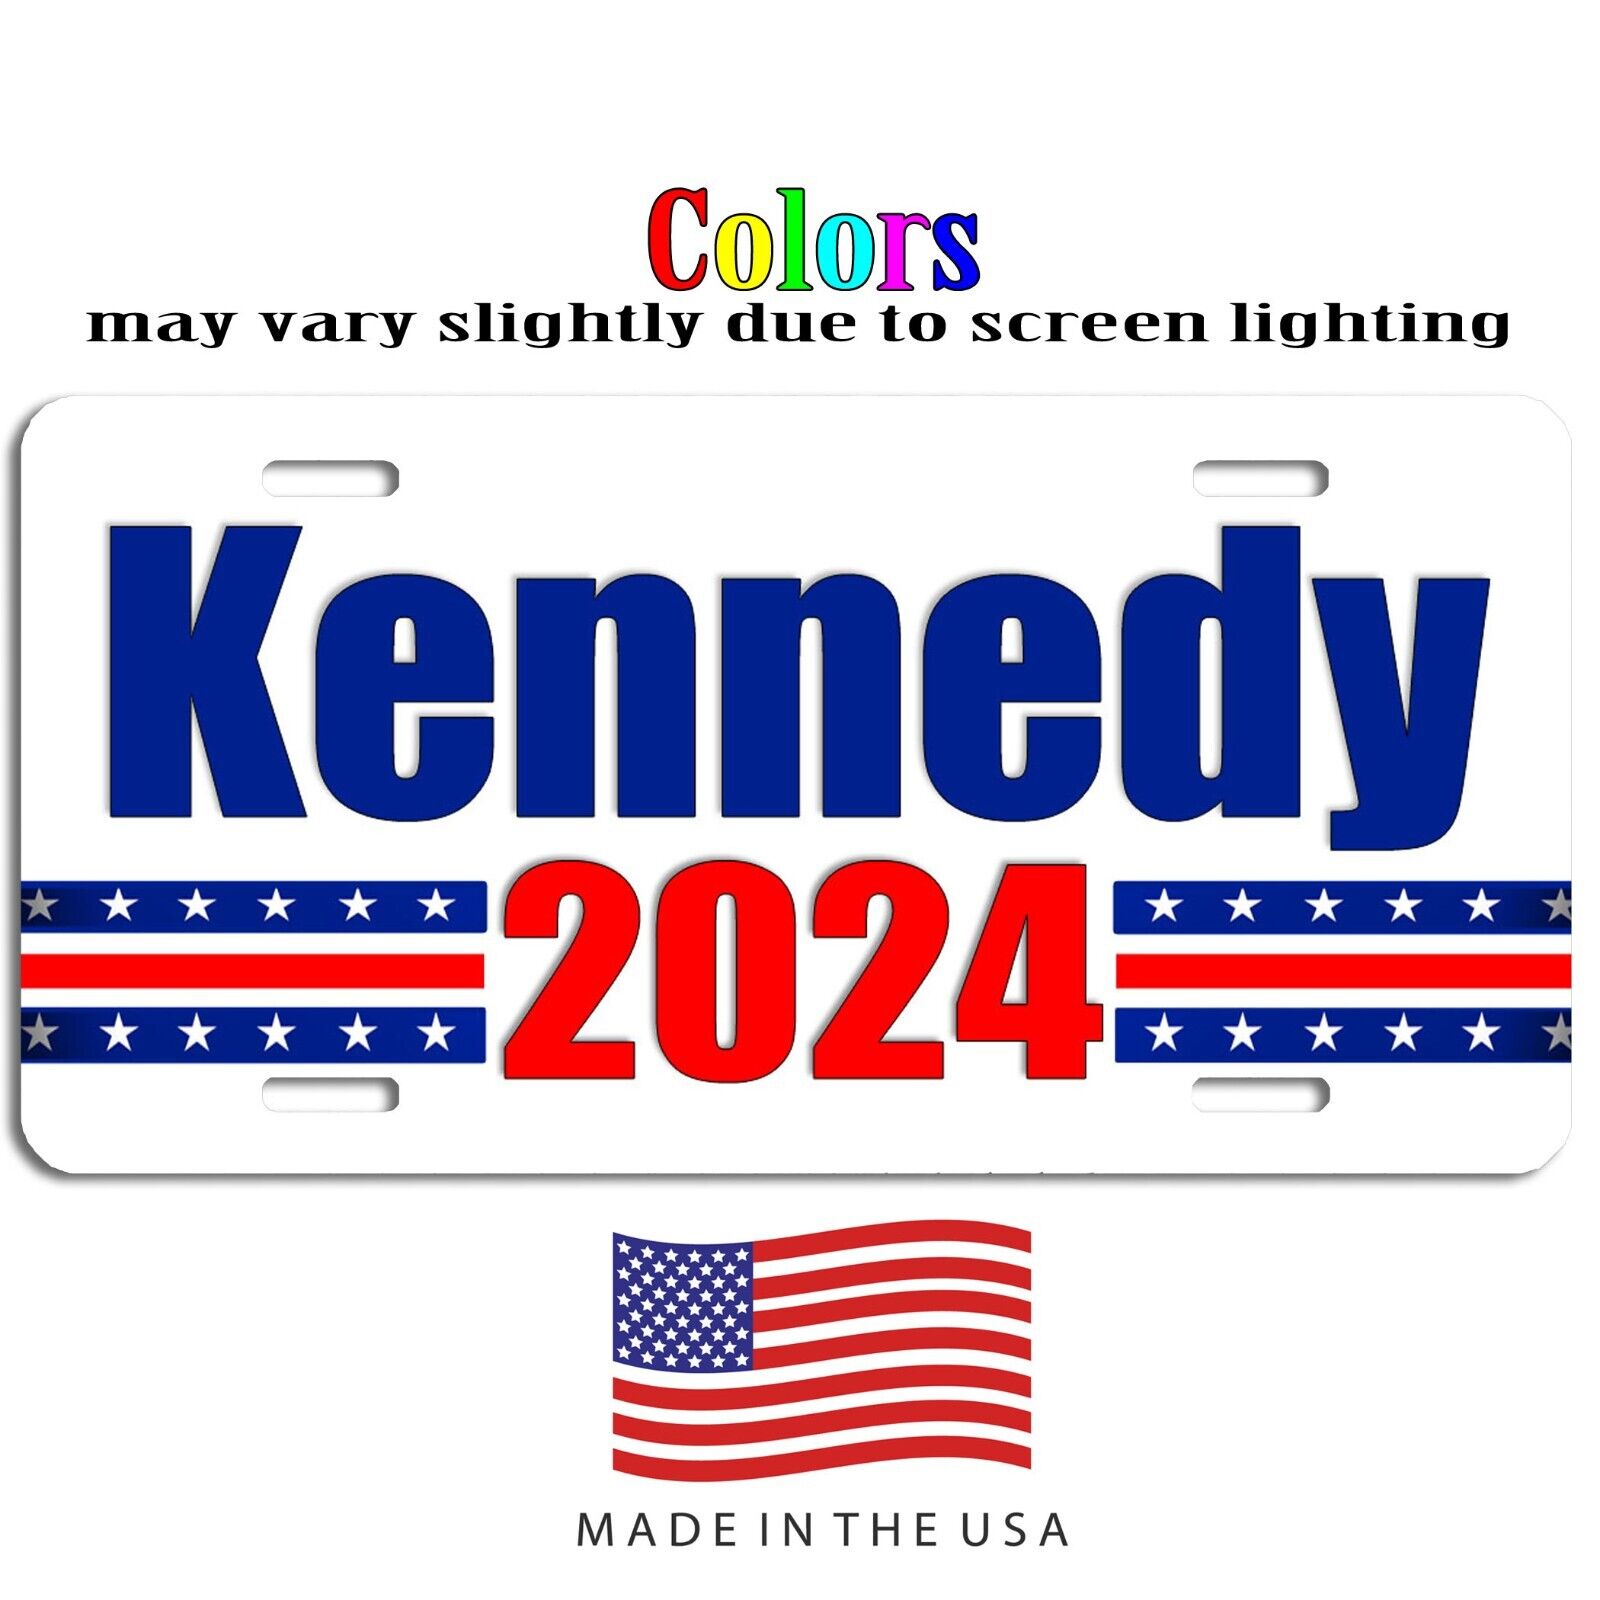 Kennedy 2024 for President White aluminum license plate car truck SUV tag